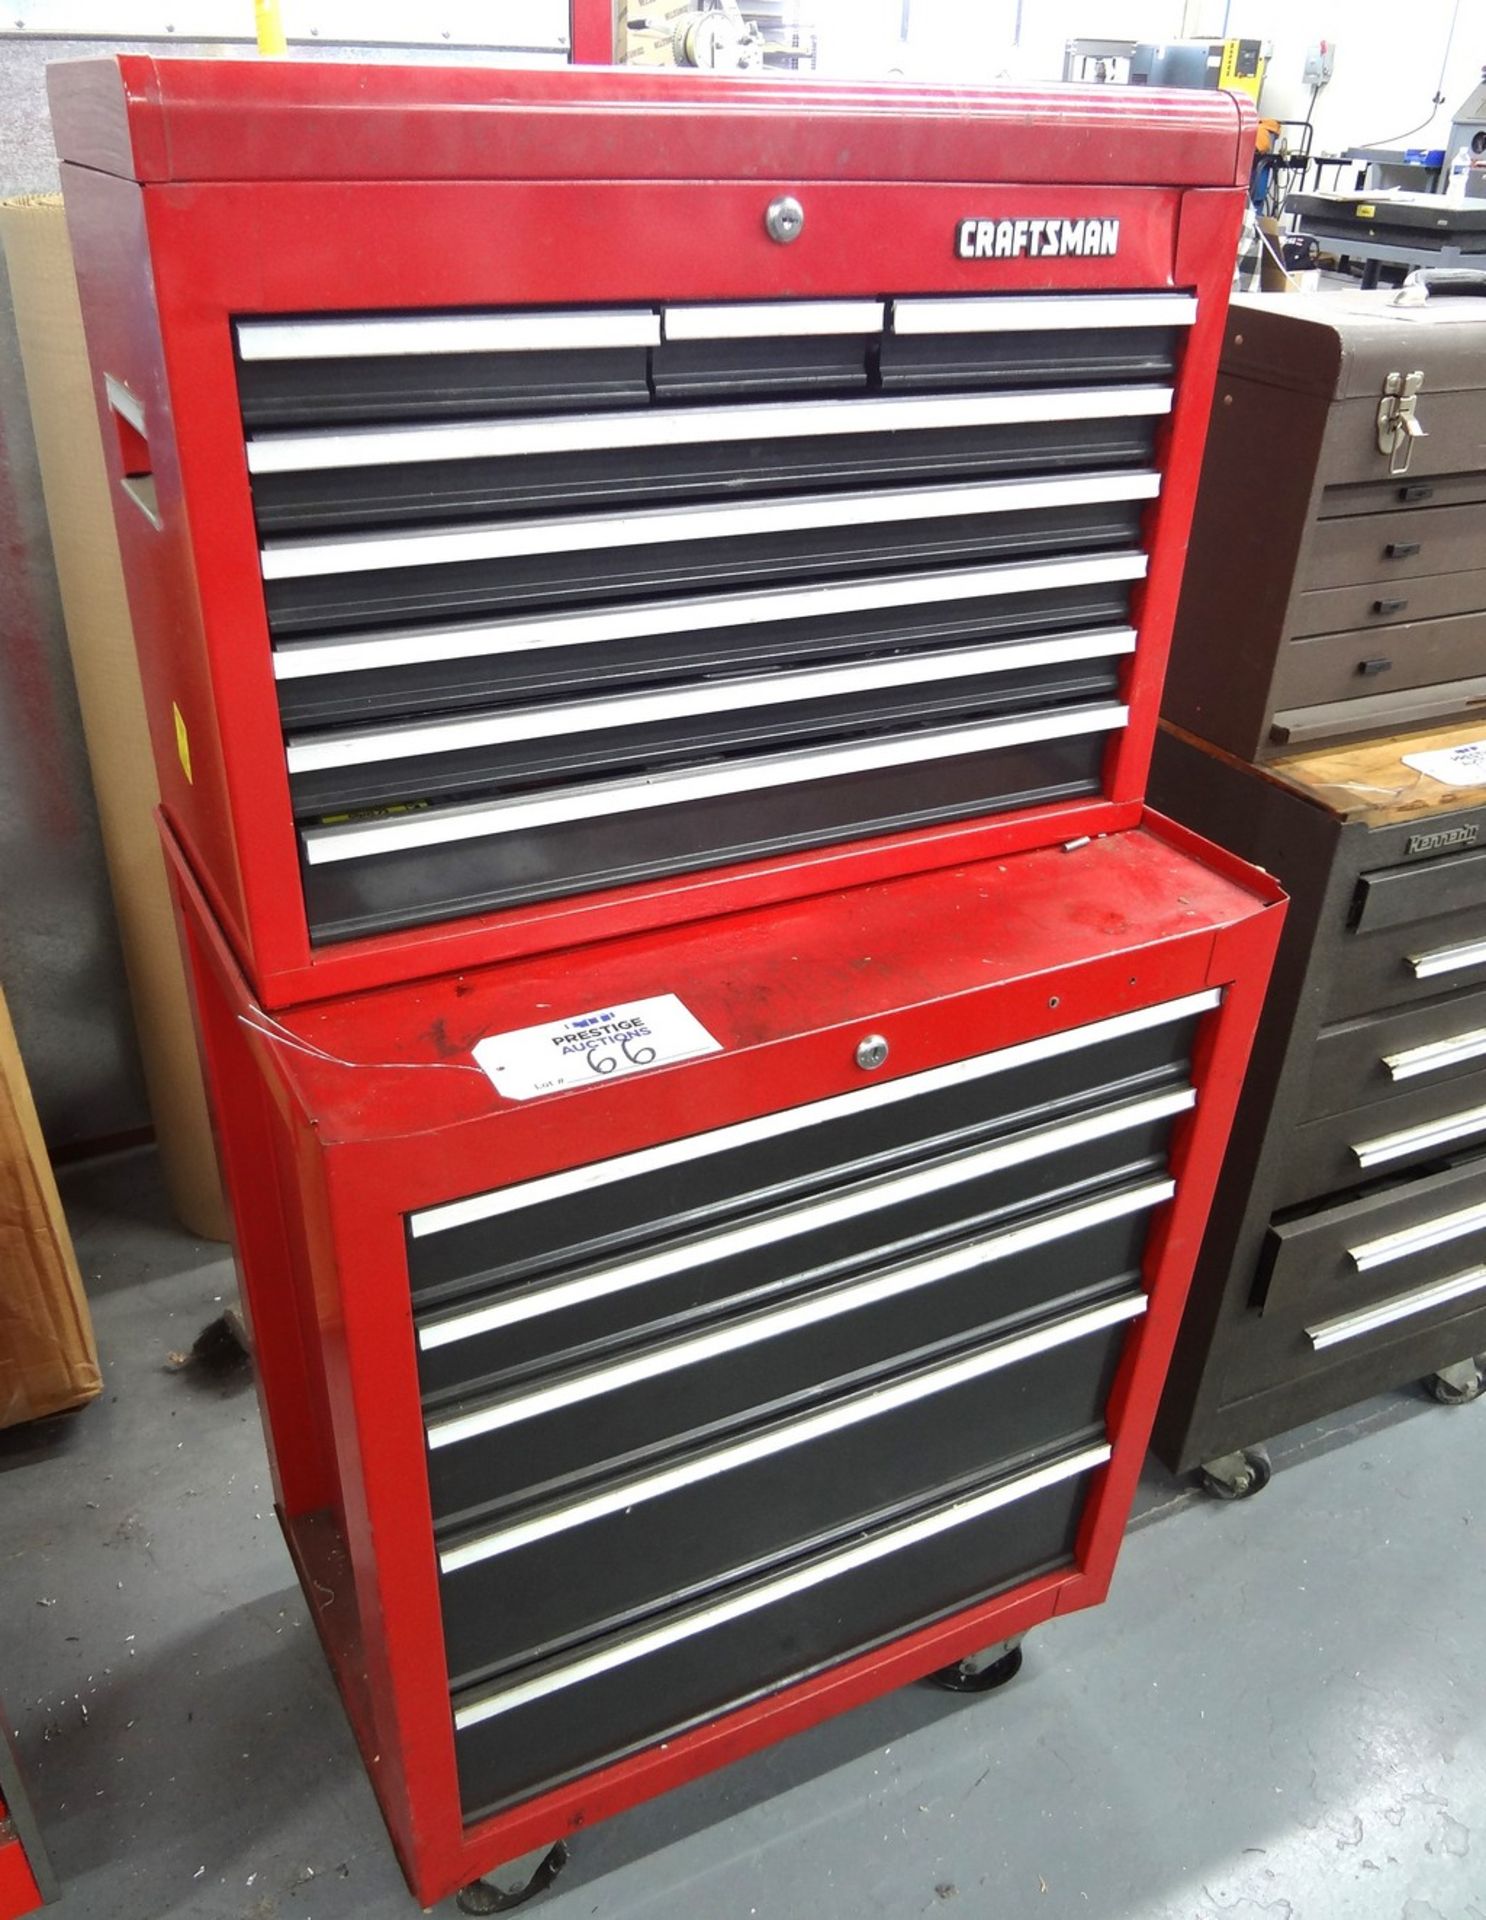 Craftsman Rolling Tool Cabinet with Contents